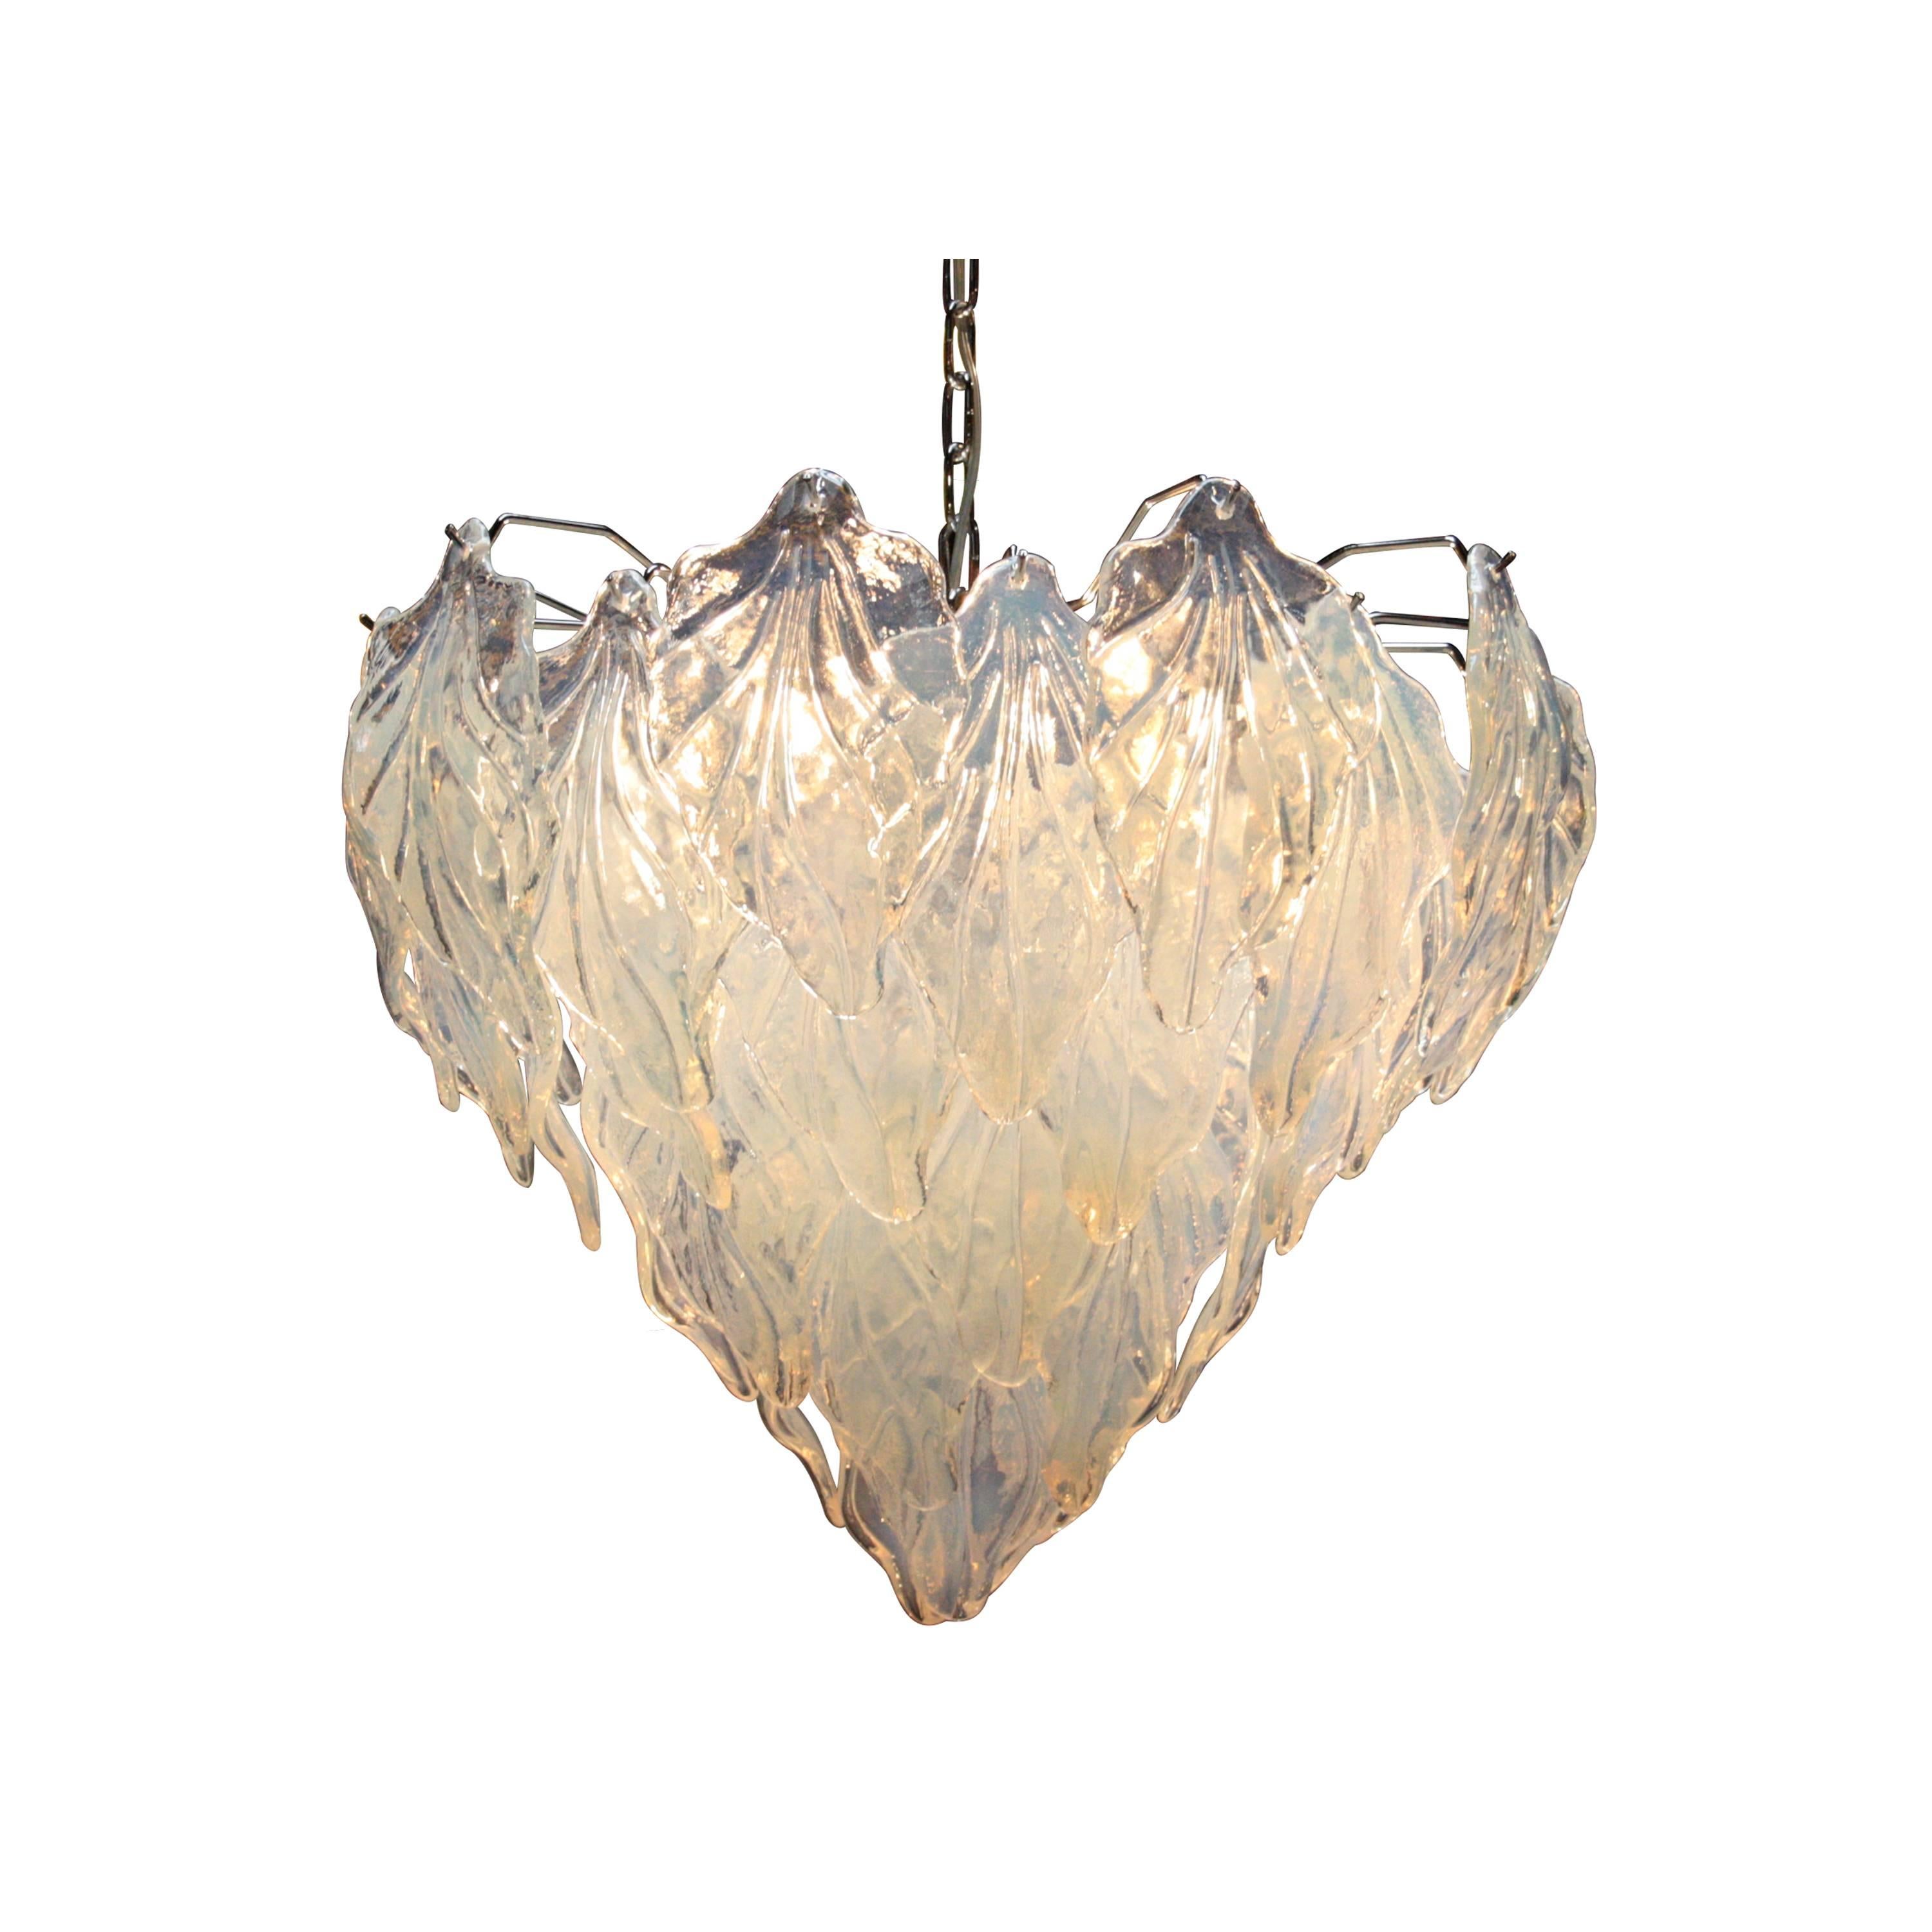 Suspension lamp composed of four points of light with metal structure. Vegetable decoration in Murano glass carved and molded by hand in white with iridescent finish.